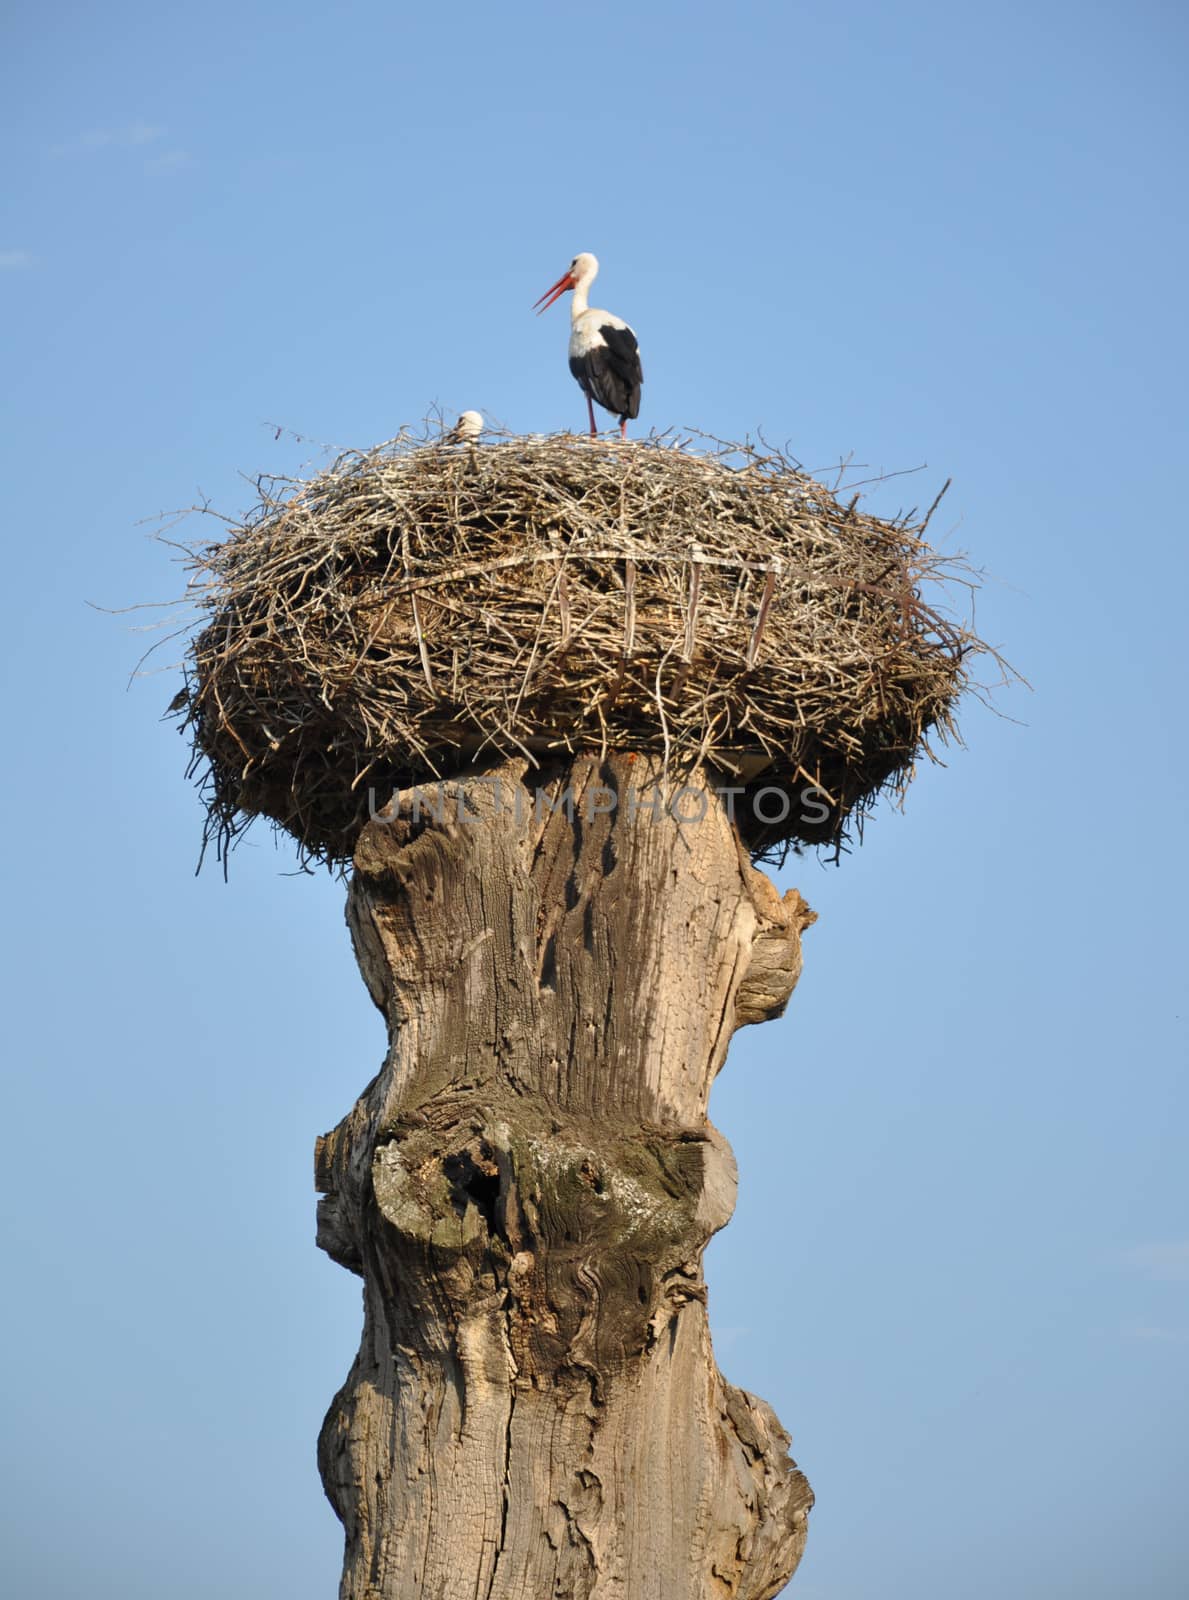 stork in a nest on an old tree by Nikola30